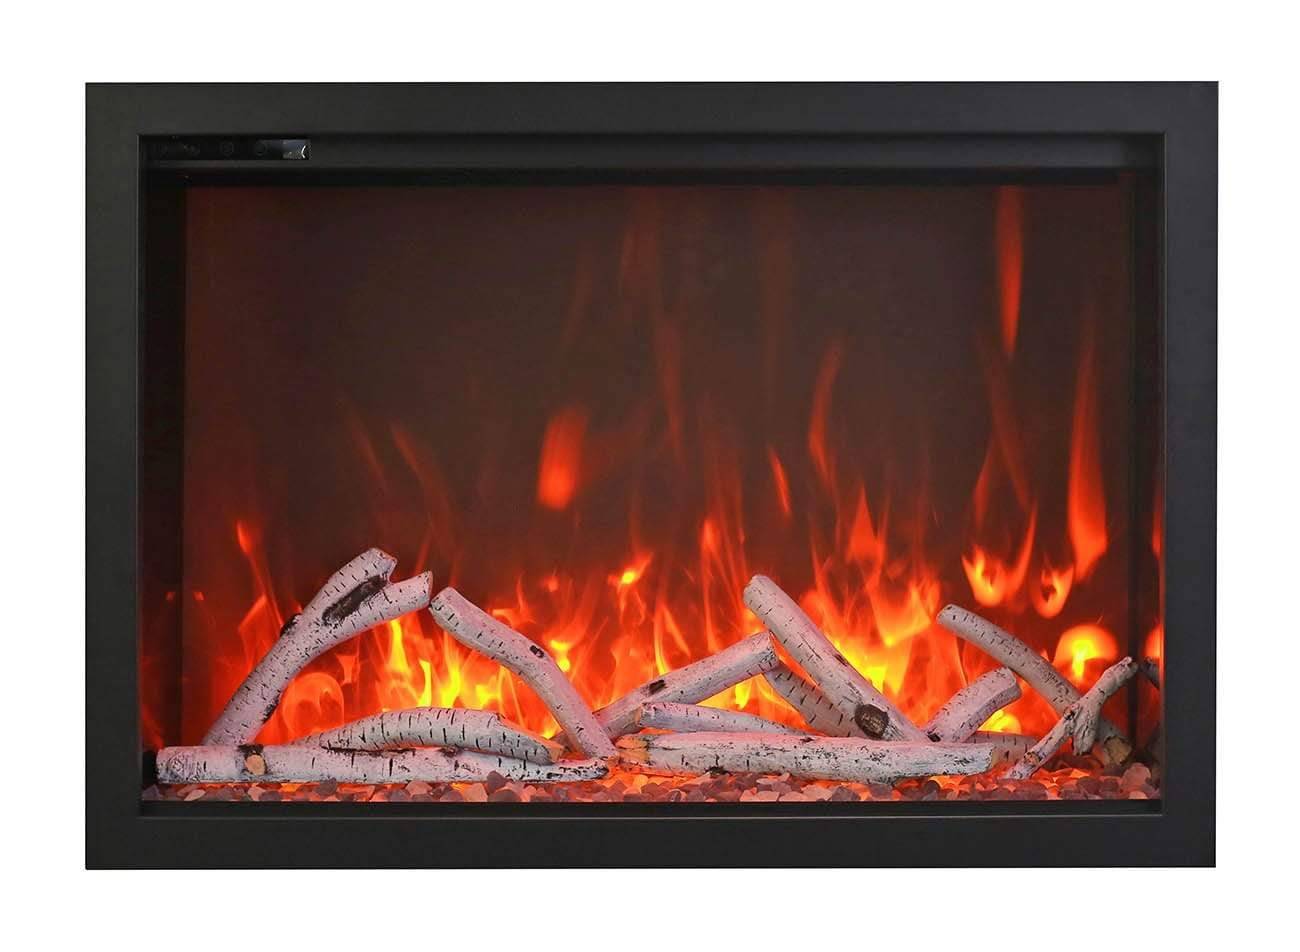 StarWood Fireplaces - Amantii TRD-38 Traditional Series -38-Inch Electric Fireplace -